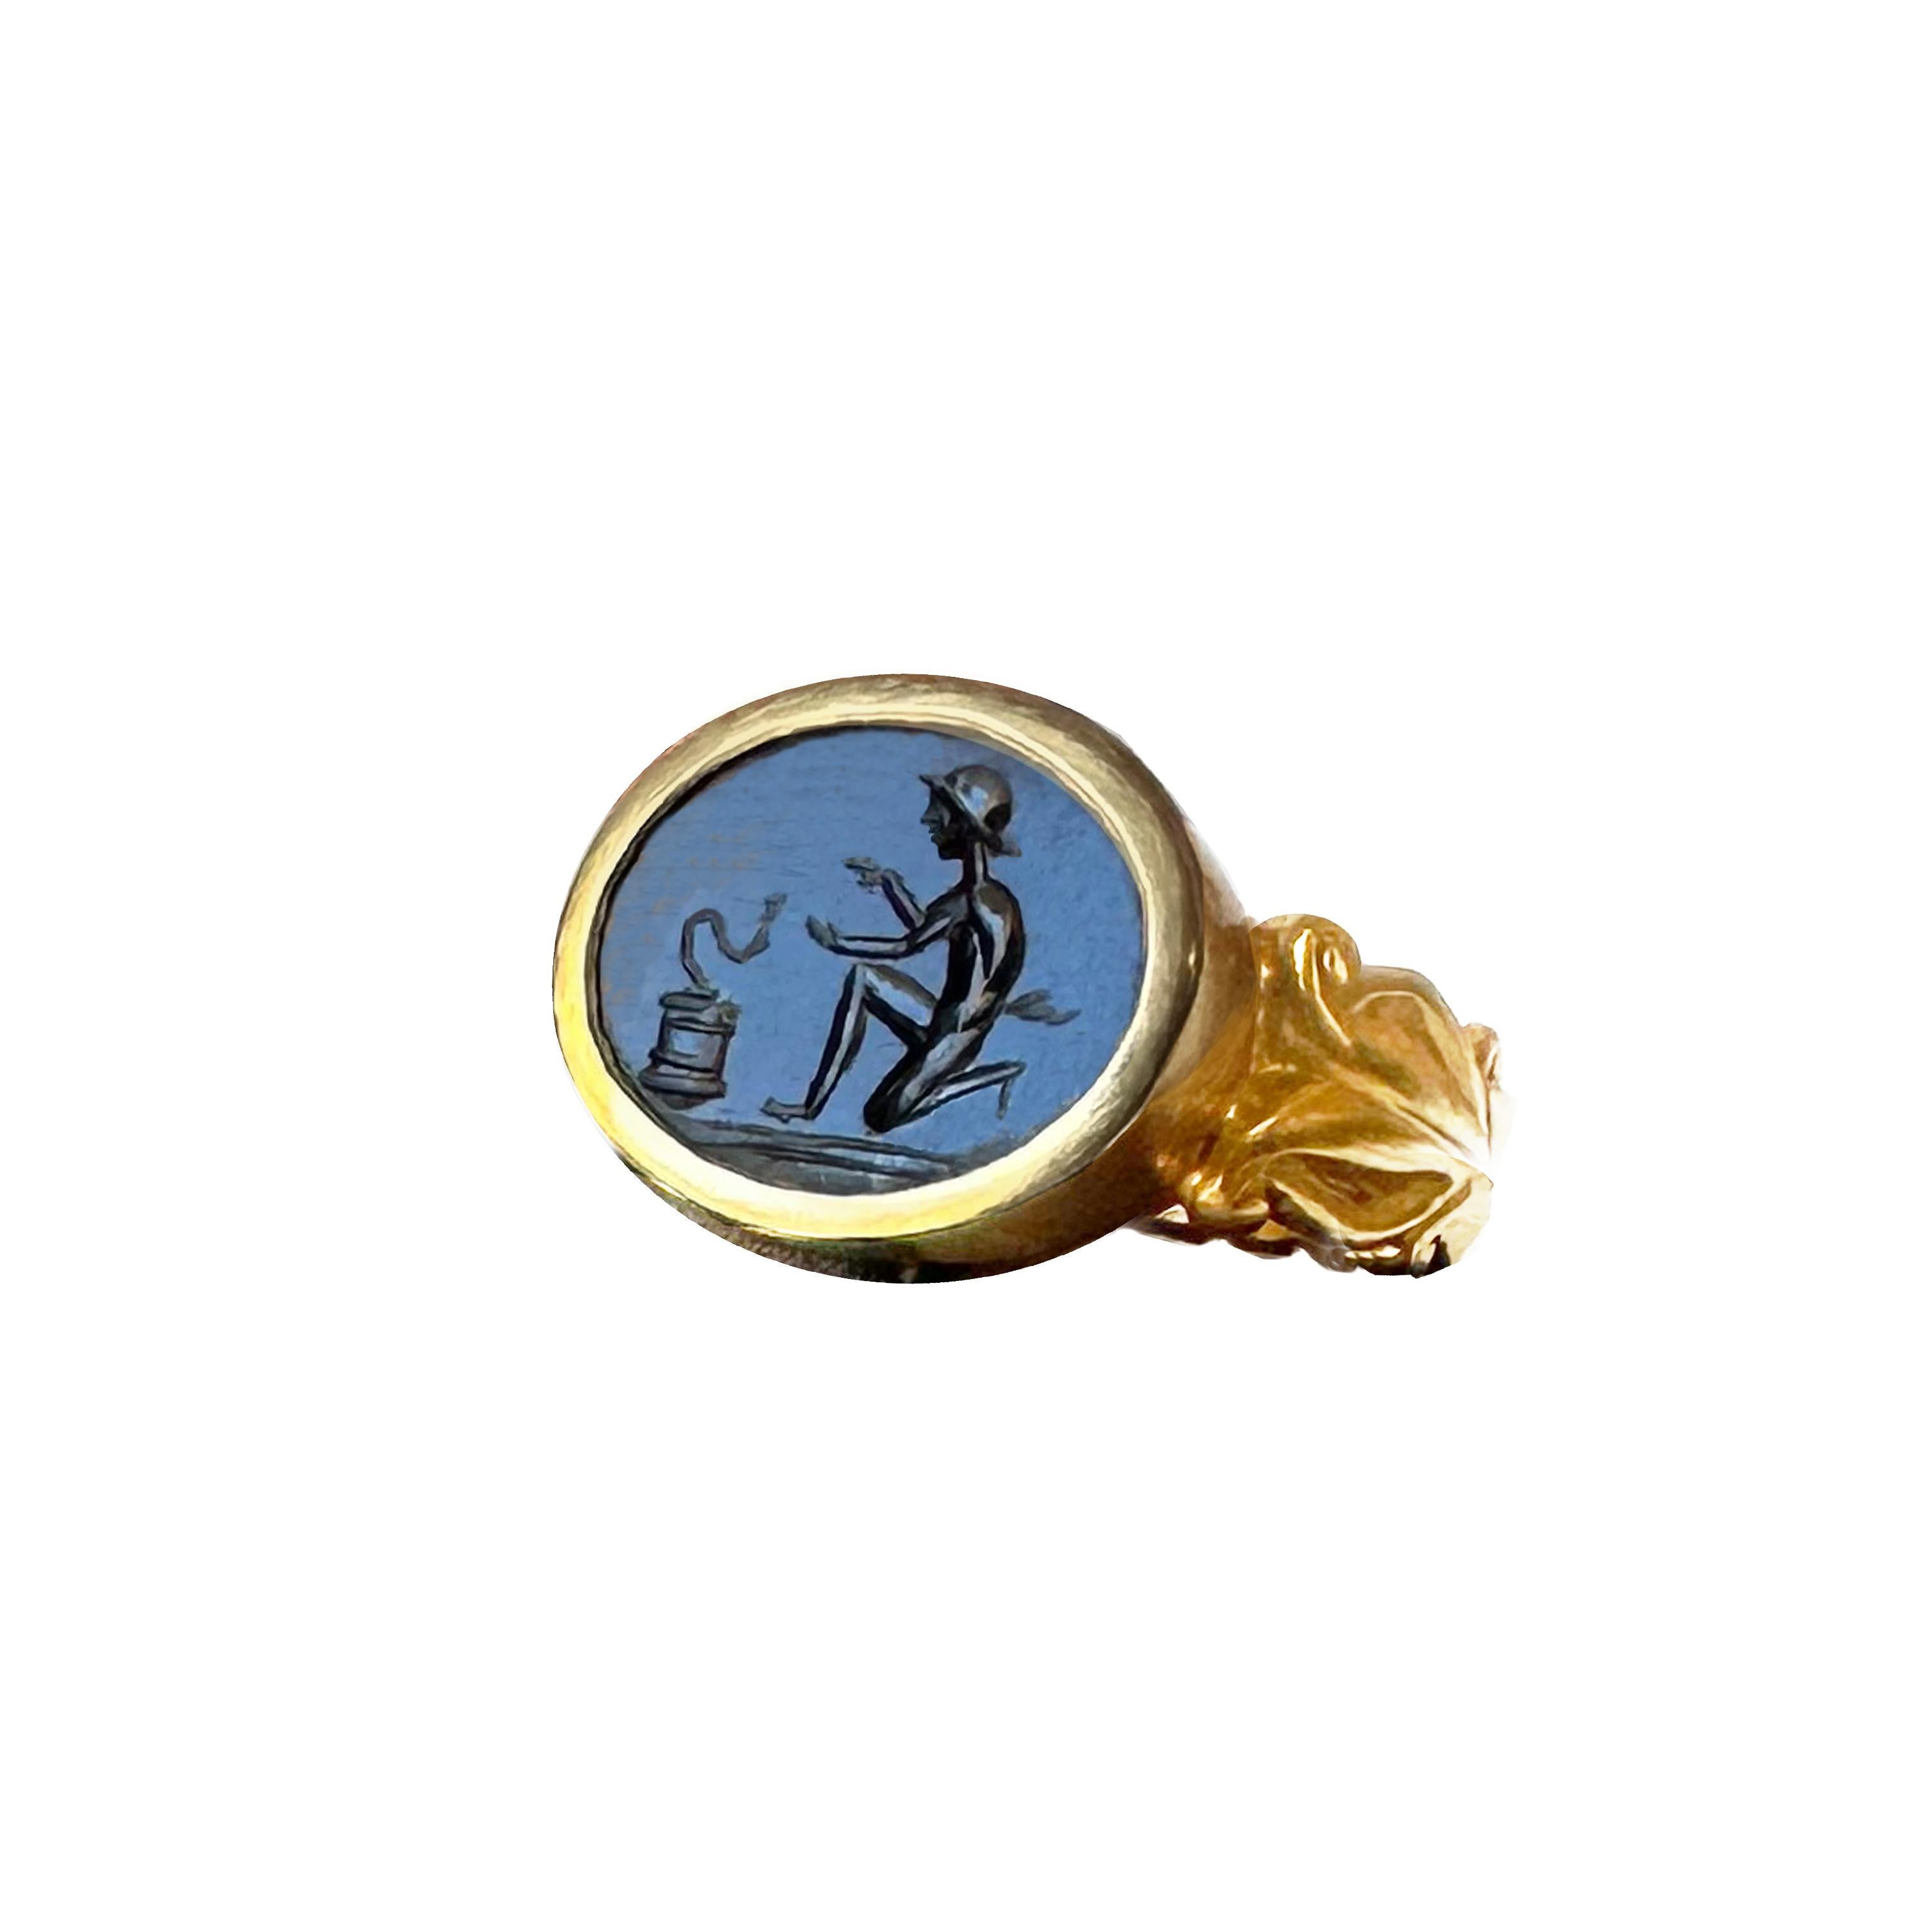 An authentic Roman intaglio on onyx has been set in this 18 Kt gold ring, which depicts a 